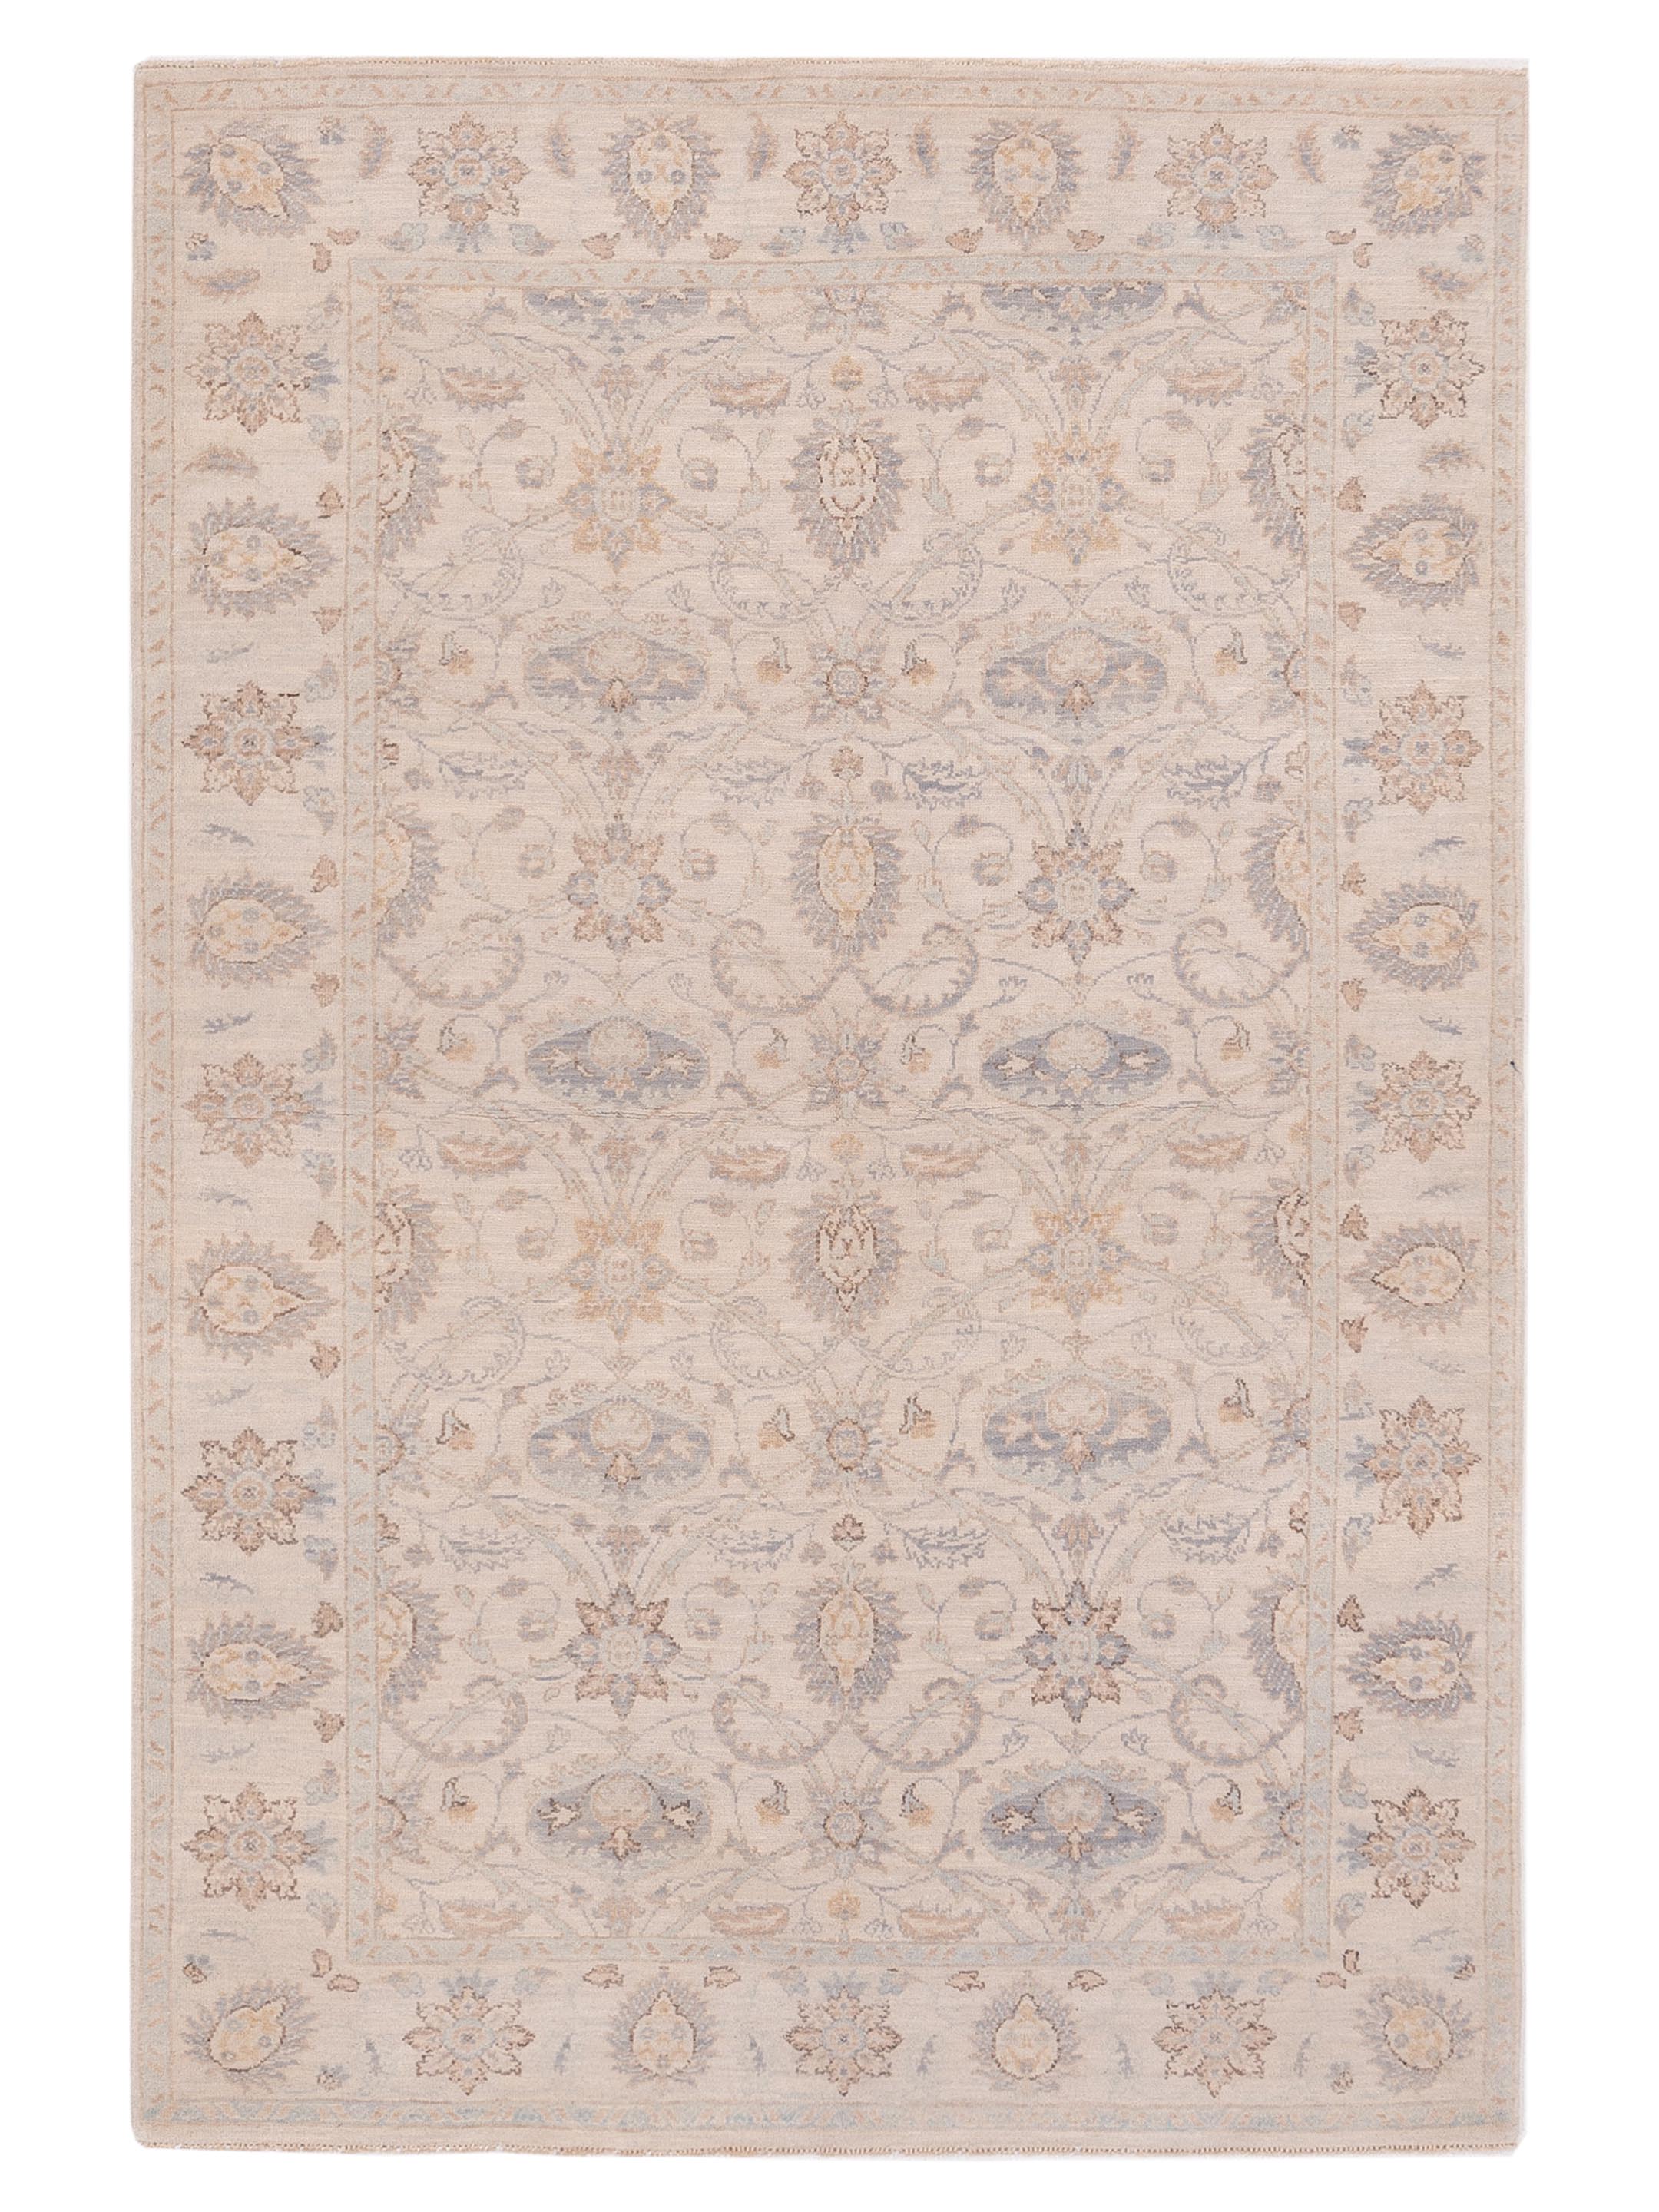 Transitional Ivory 4x6 Area Rug	